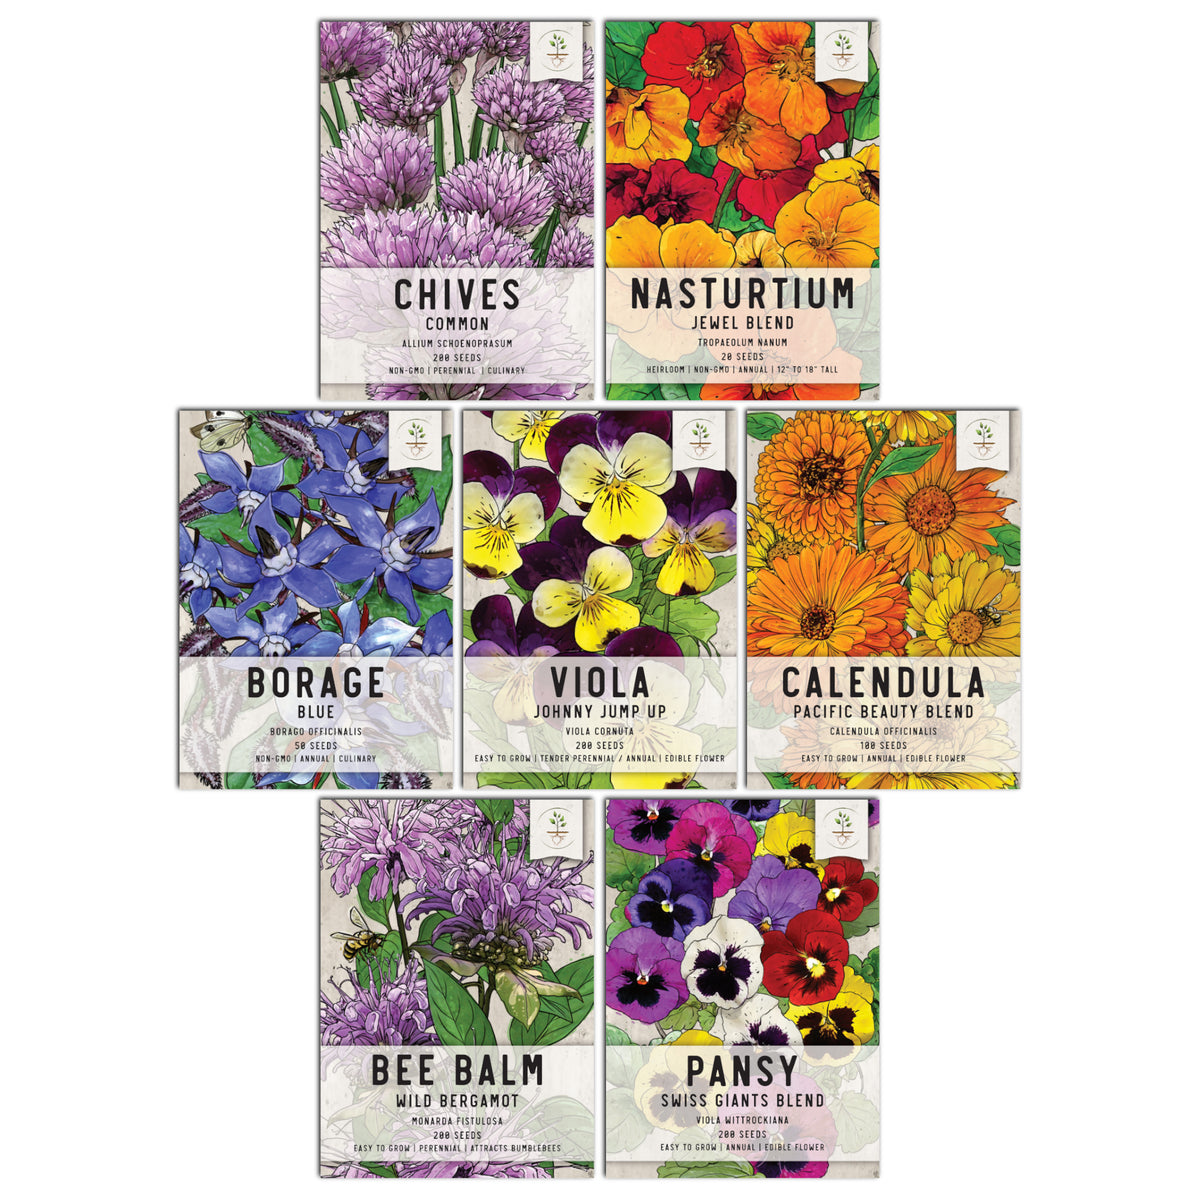 12 Edible Flower Seeds Variety Pack for Planting Indoor & Outdoors. 2300+ Non-GMO Heirloom Flower Garden Seeds: Borage, California Poppy, Cape